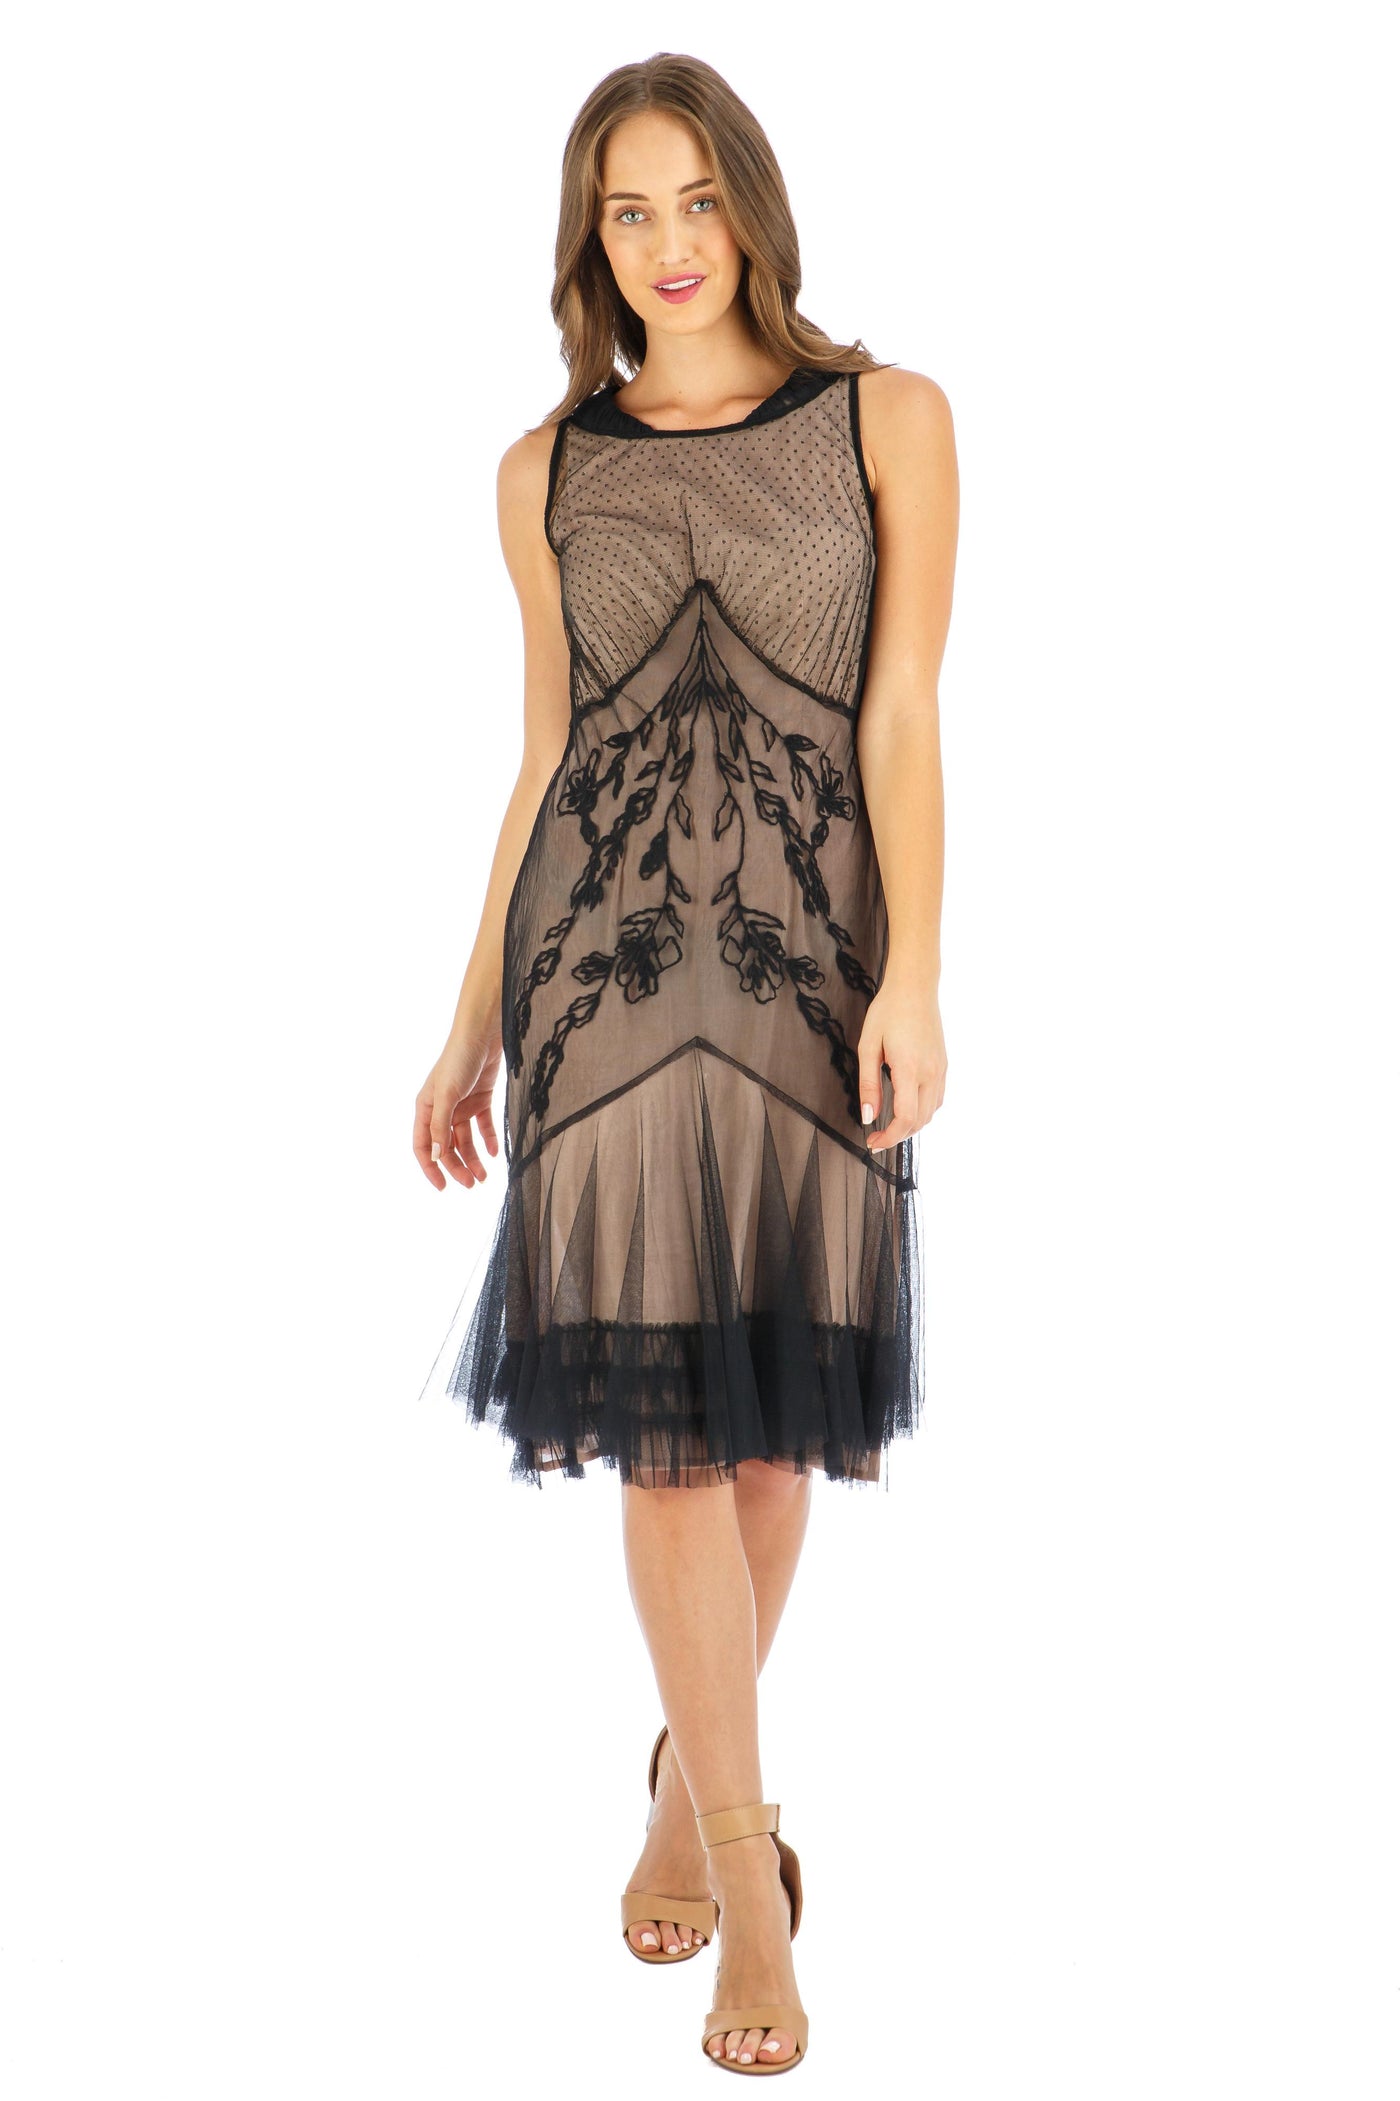 Tatianna Vintage Style Party Dress in Onyx by Nataya - SOLD OUT